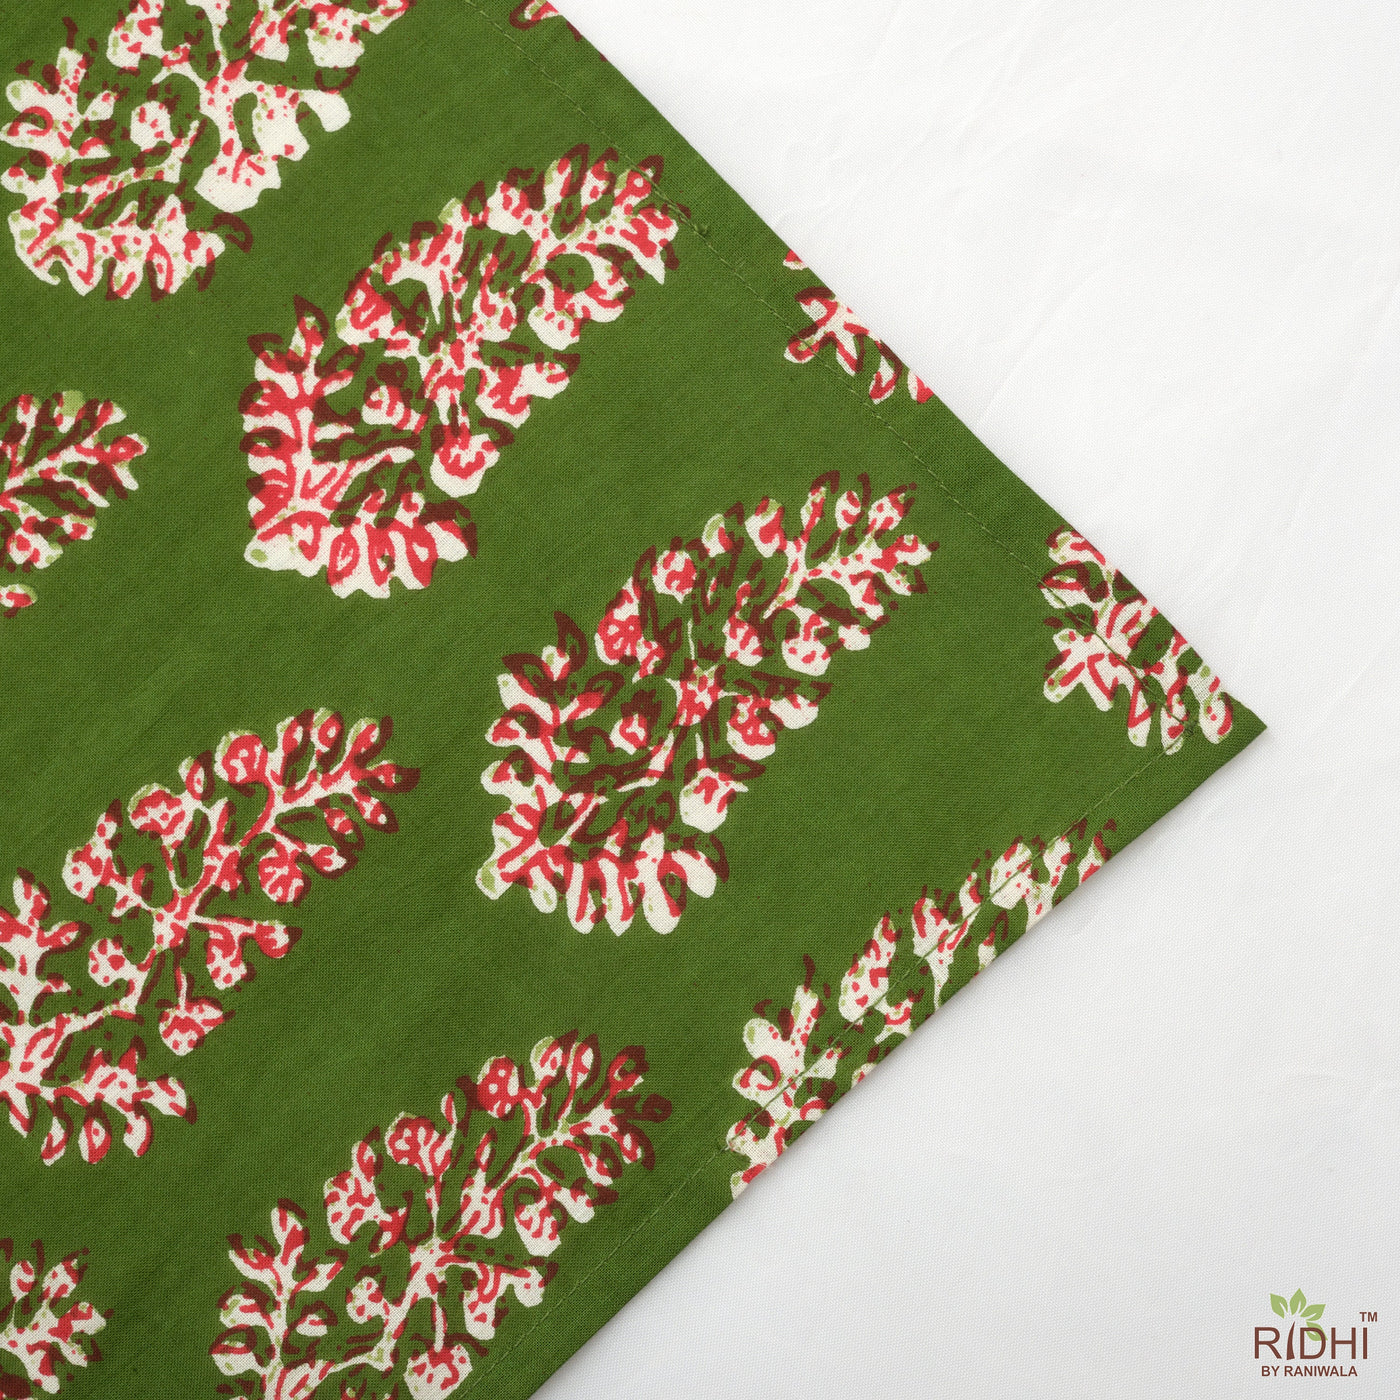 Dark Moss Green, Red and White Indian Floral Printed 100% Pure Cotton Cloth Napkins, Gifts, 18x18"- Cocktail Napkins, 20x20"- Dinner Napkins